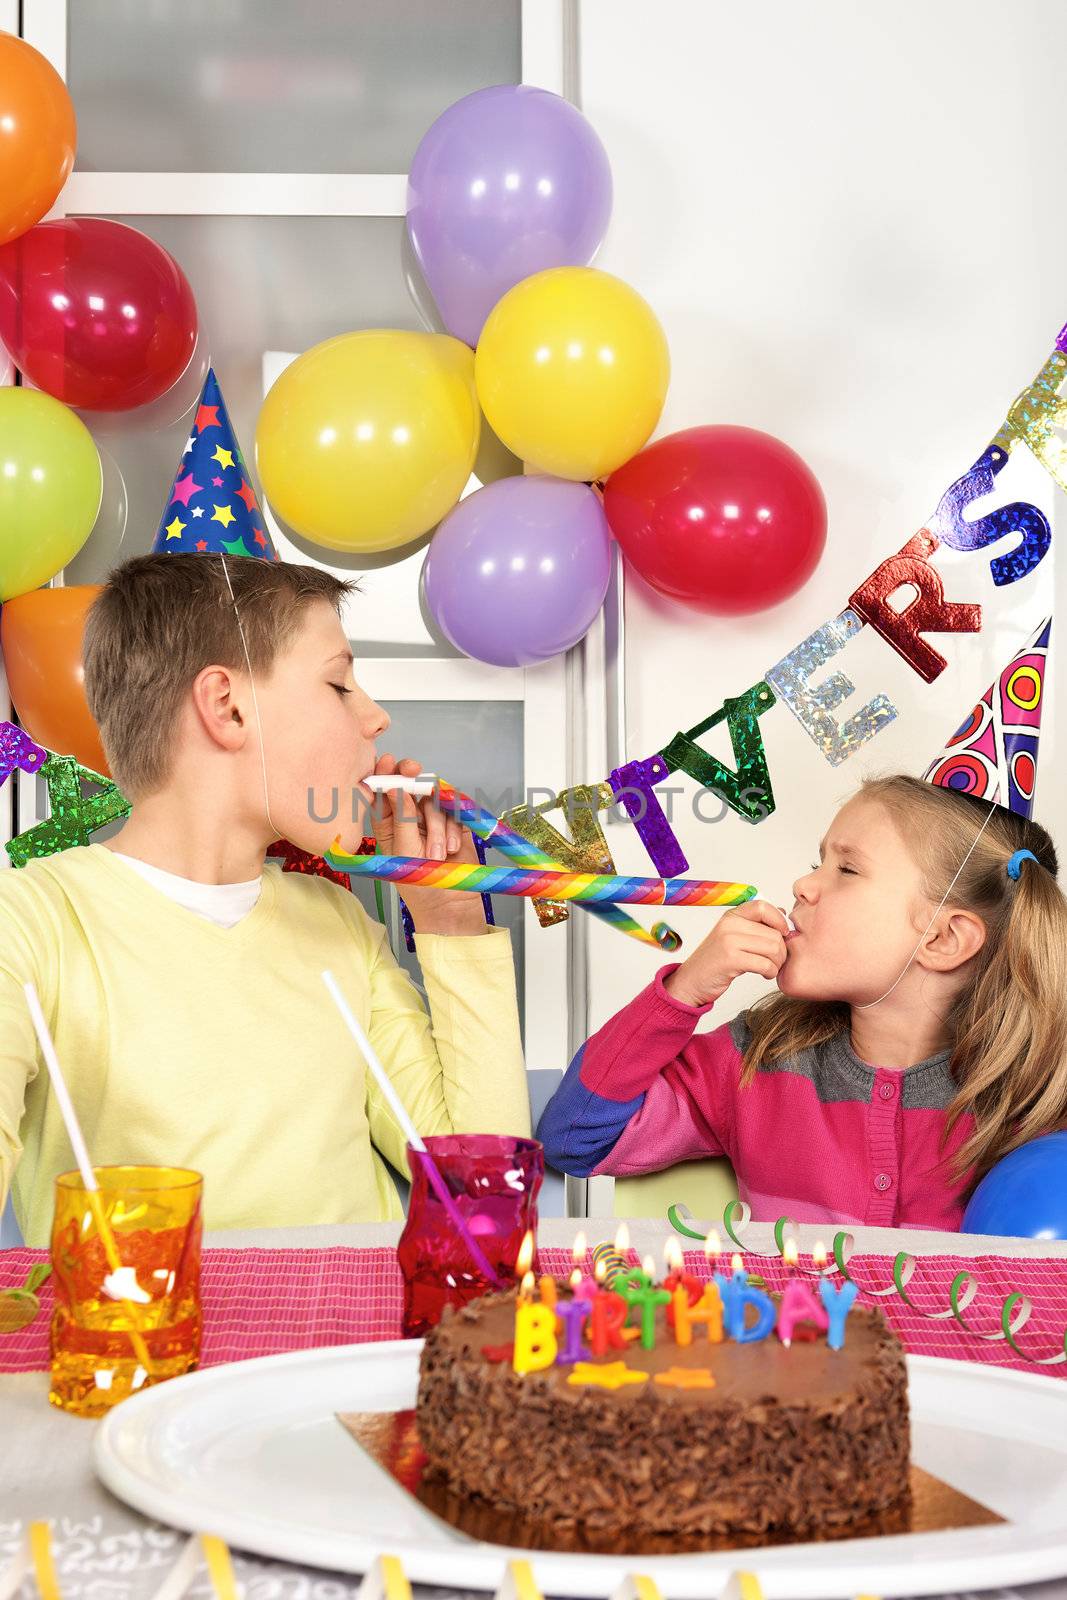 Two children at birthday party by vwalakte